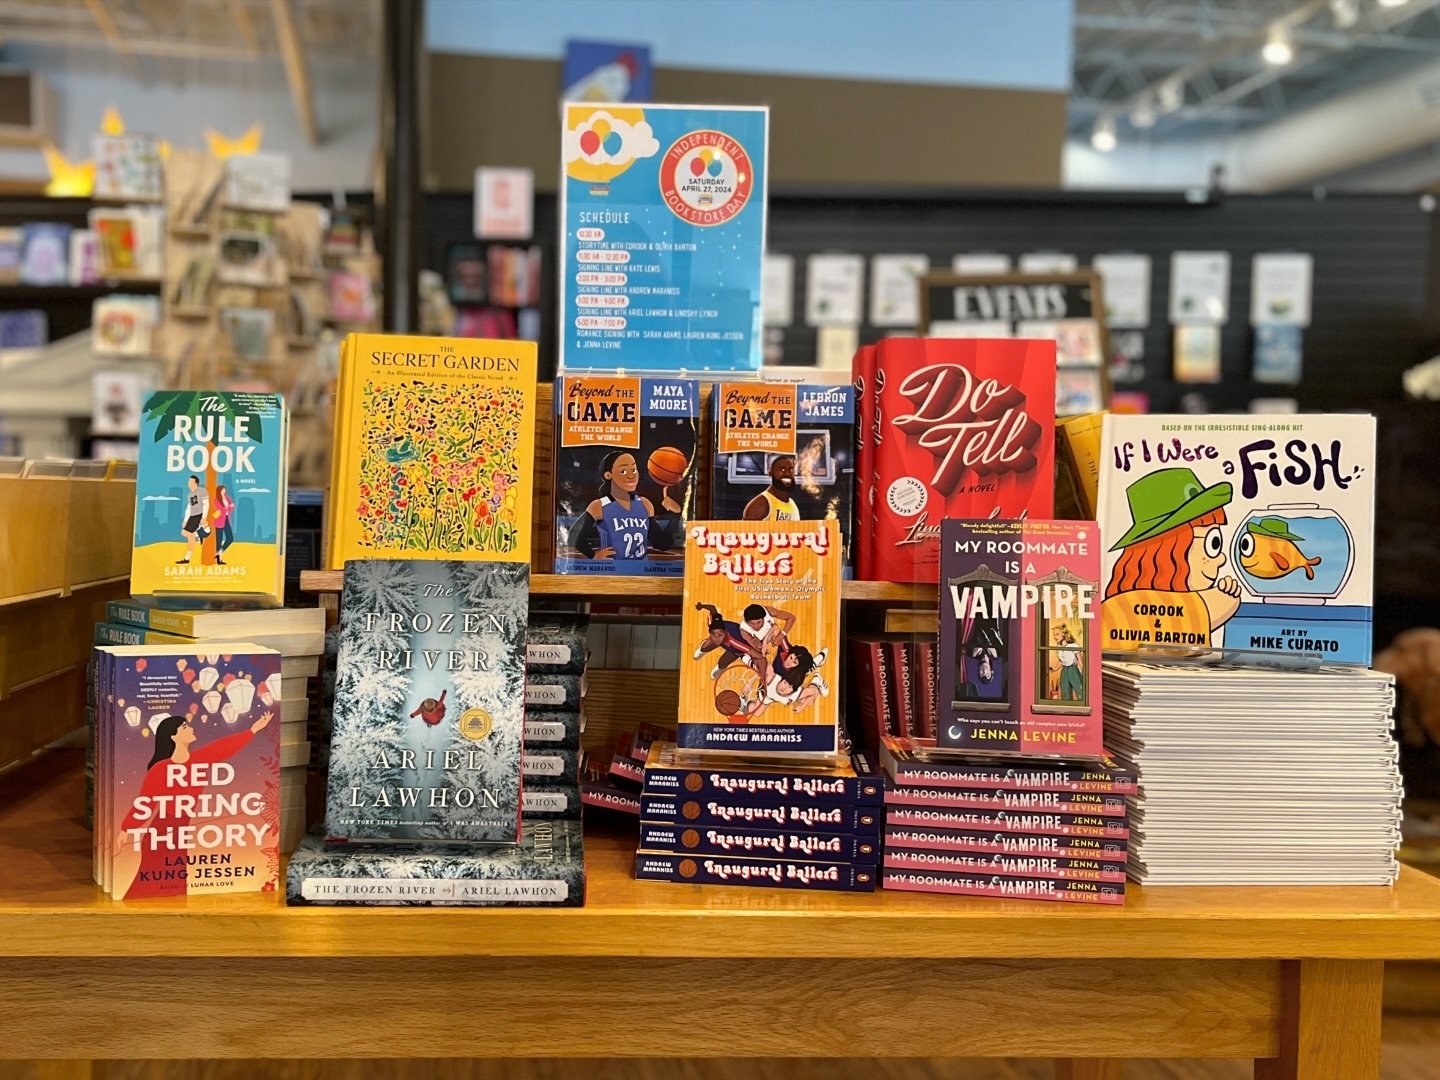 Independent Bookstore Day is ONE WEEK away!! We hope you&rsquo;ll join us on Saturday, 4/27, for a full day of author appearances, exclusive IBD merch, and a huge audiobook prize giveaway with @librofm. Seriously, it&rsquo;s going to be an absolute b